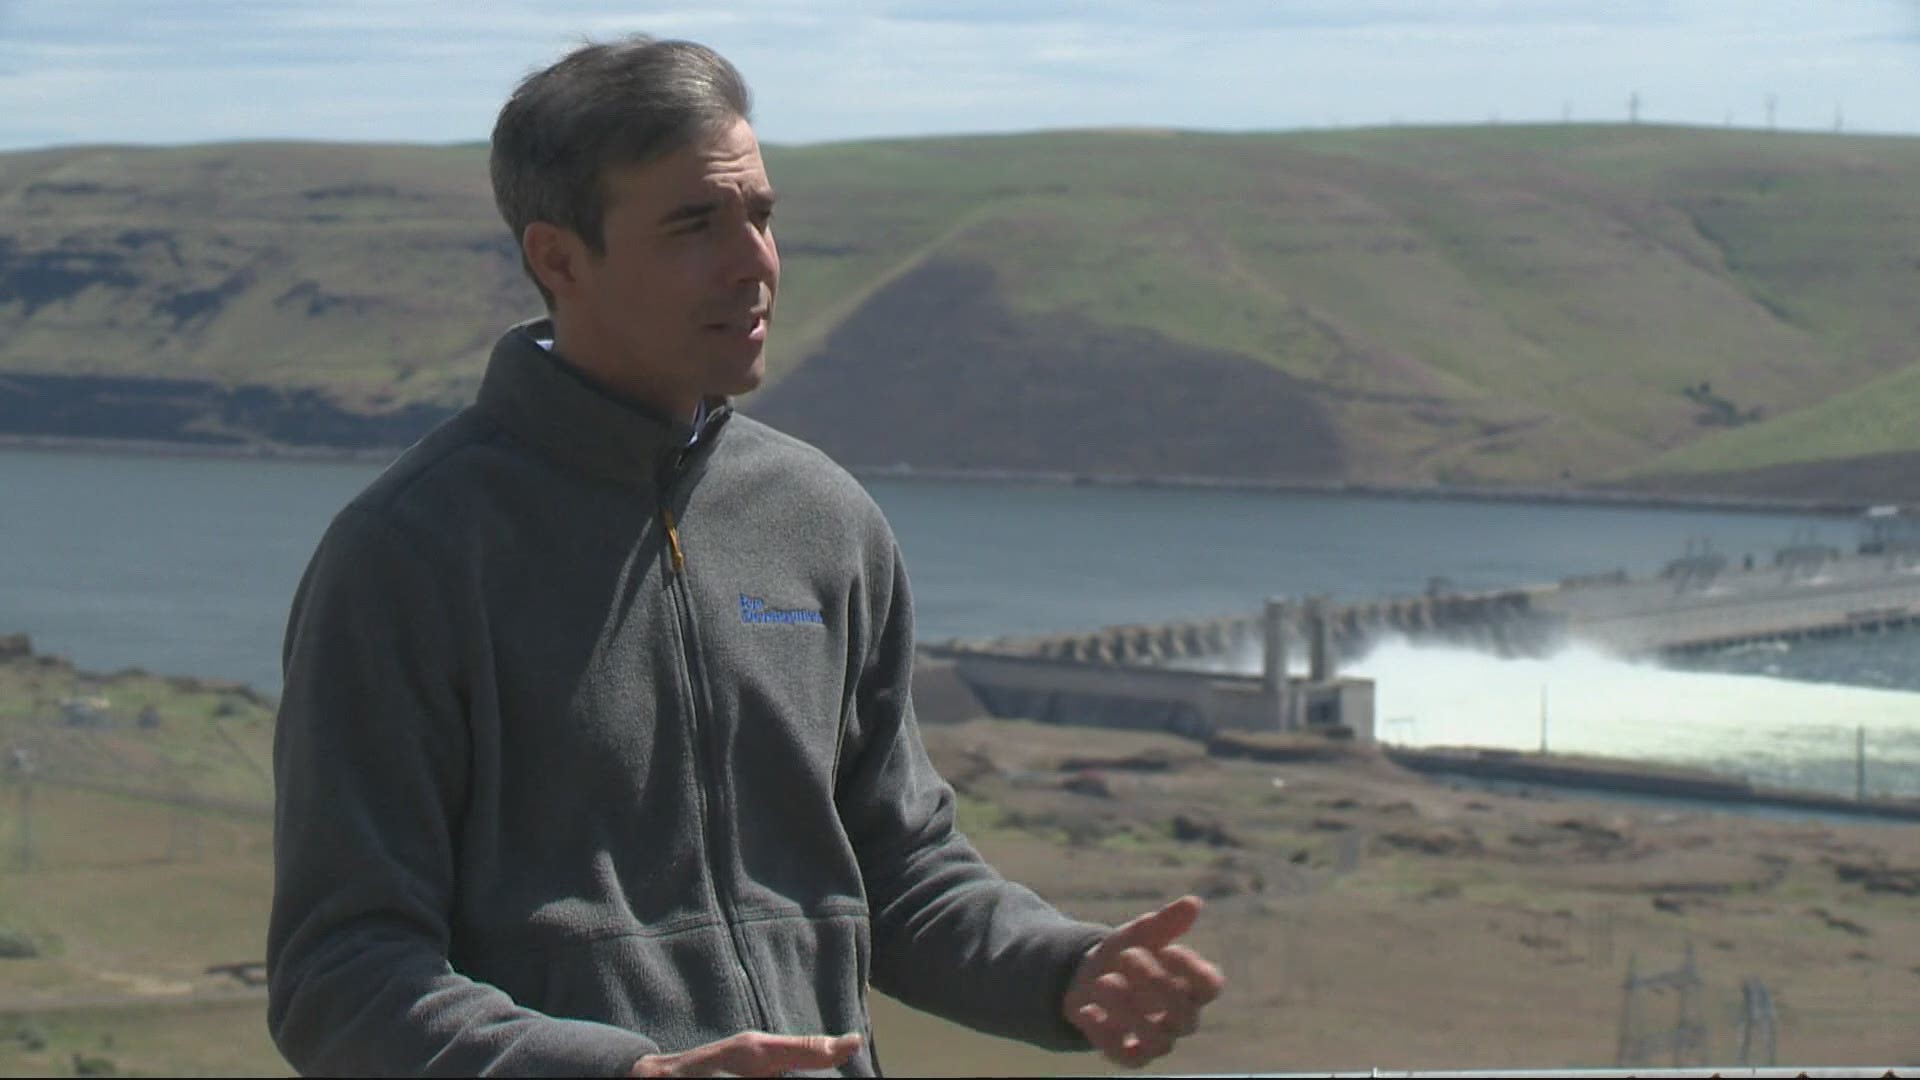 There’s a big new project in the Columbia Gorge combining solar, wind and hydropower. Matt Zaffino got a chance to check it out.